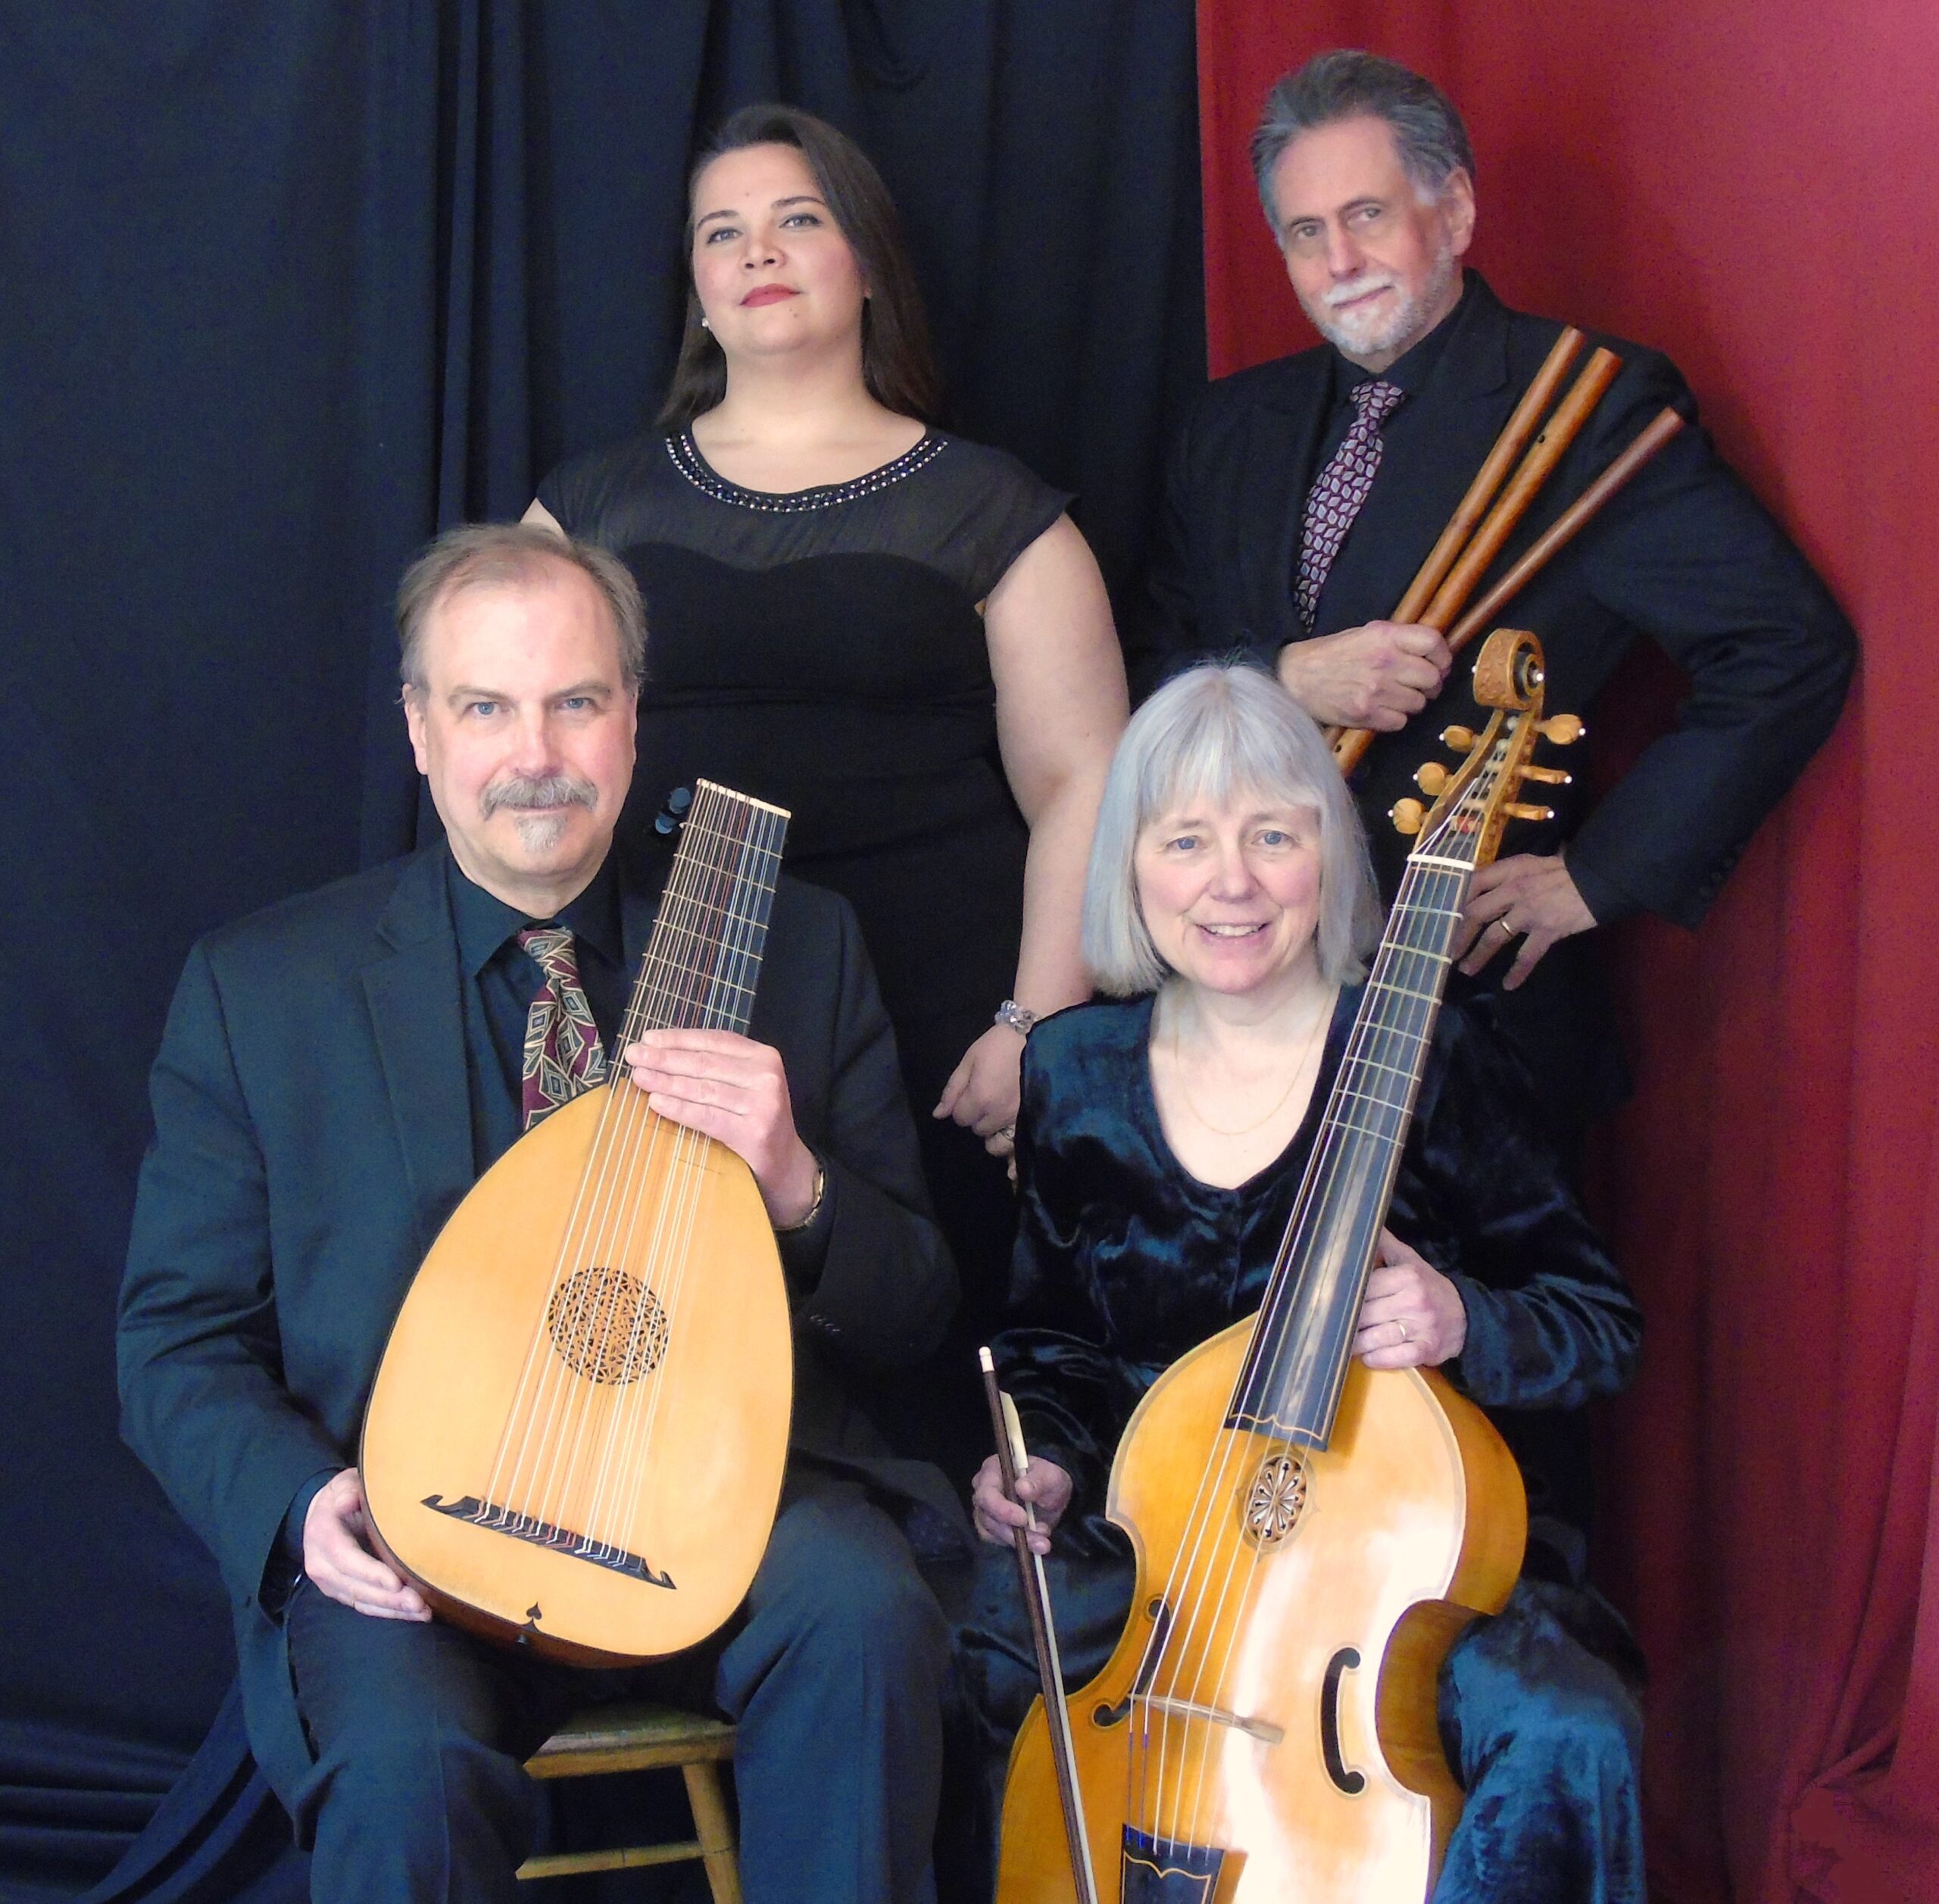 Photo of members of Ensemble Chaconne